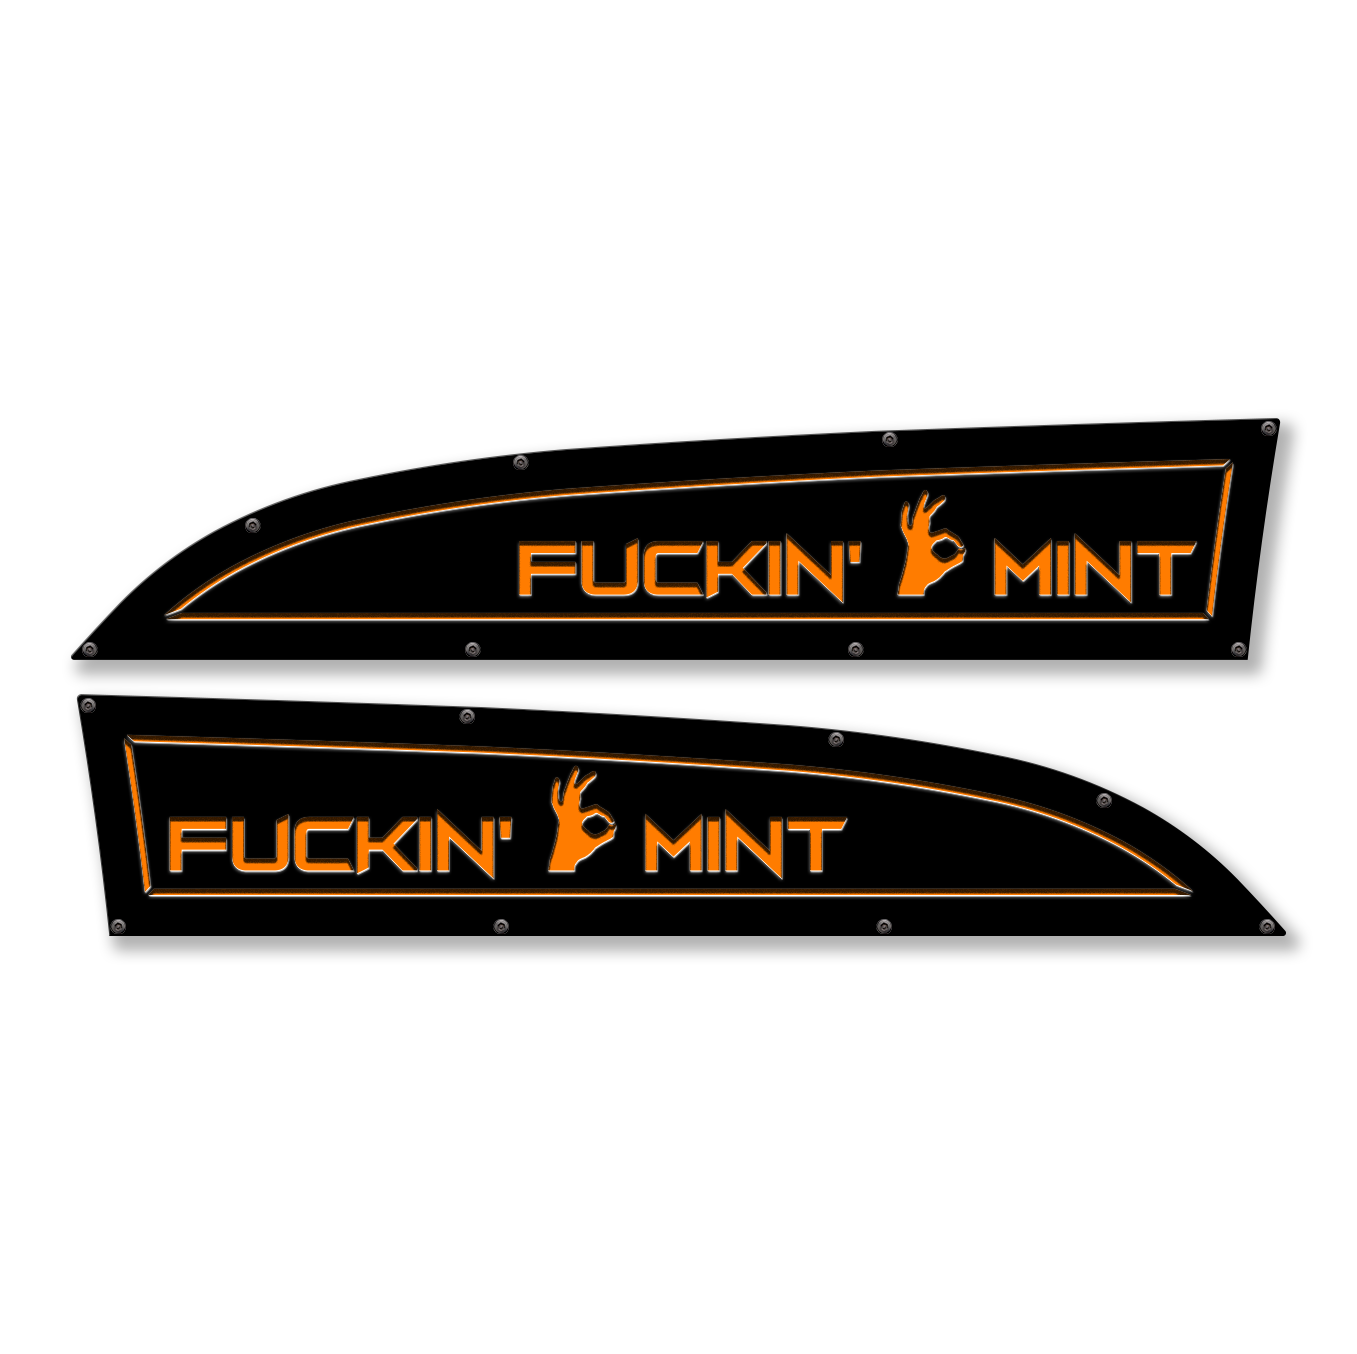 F*ckin' Mint 11-16 Ford® Super Duty® Fender Badge Replacements - Fully Customizable, LED and Non-LED